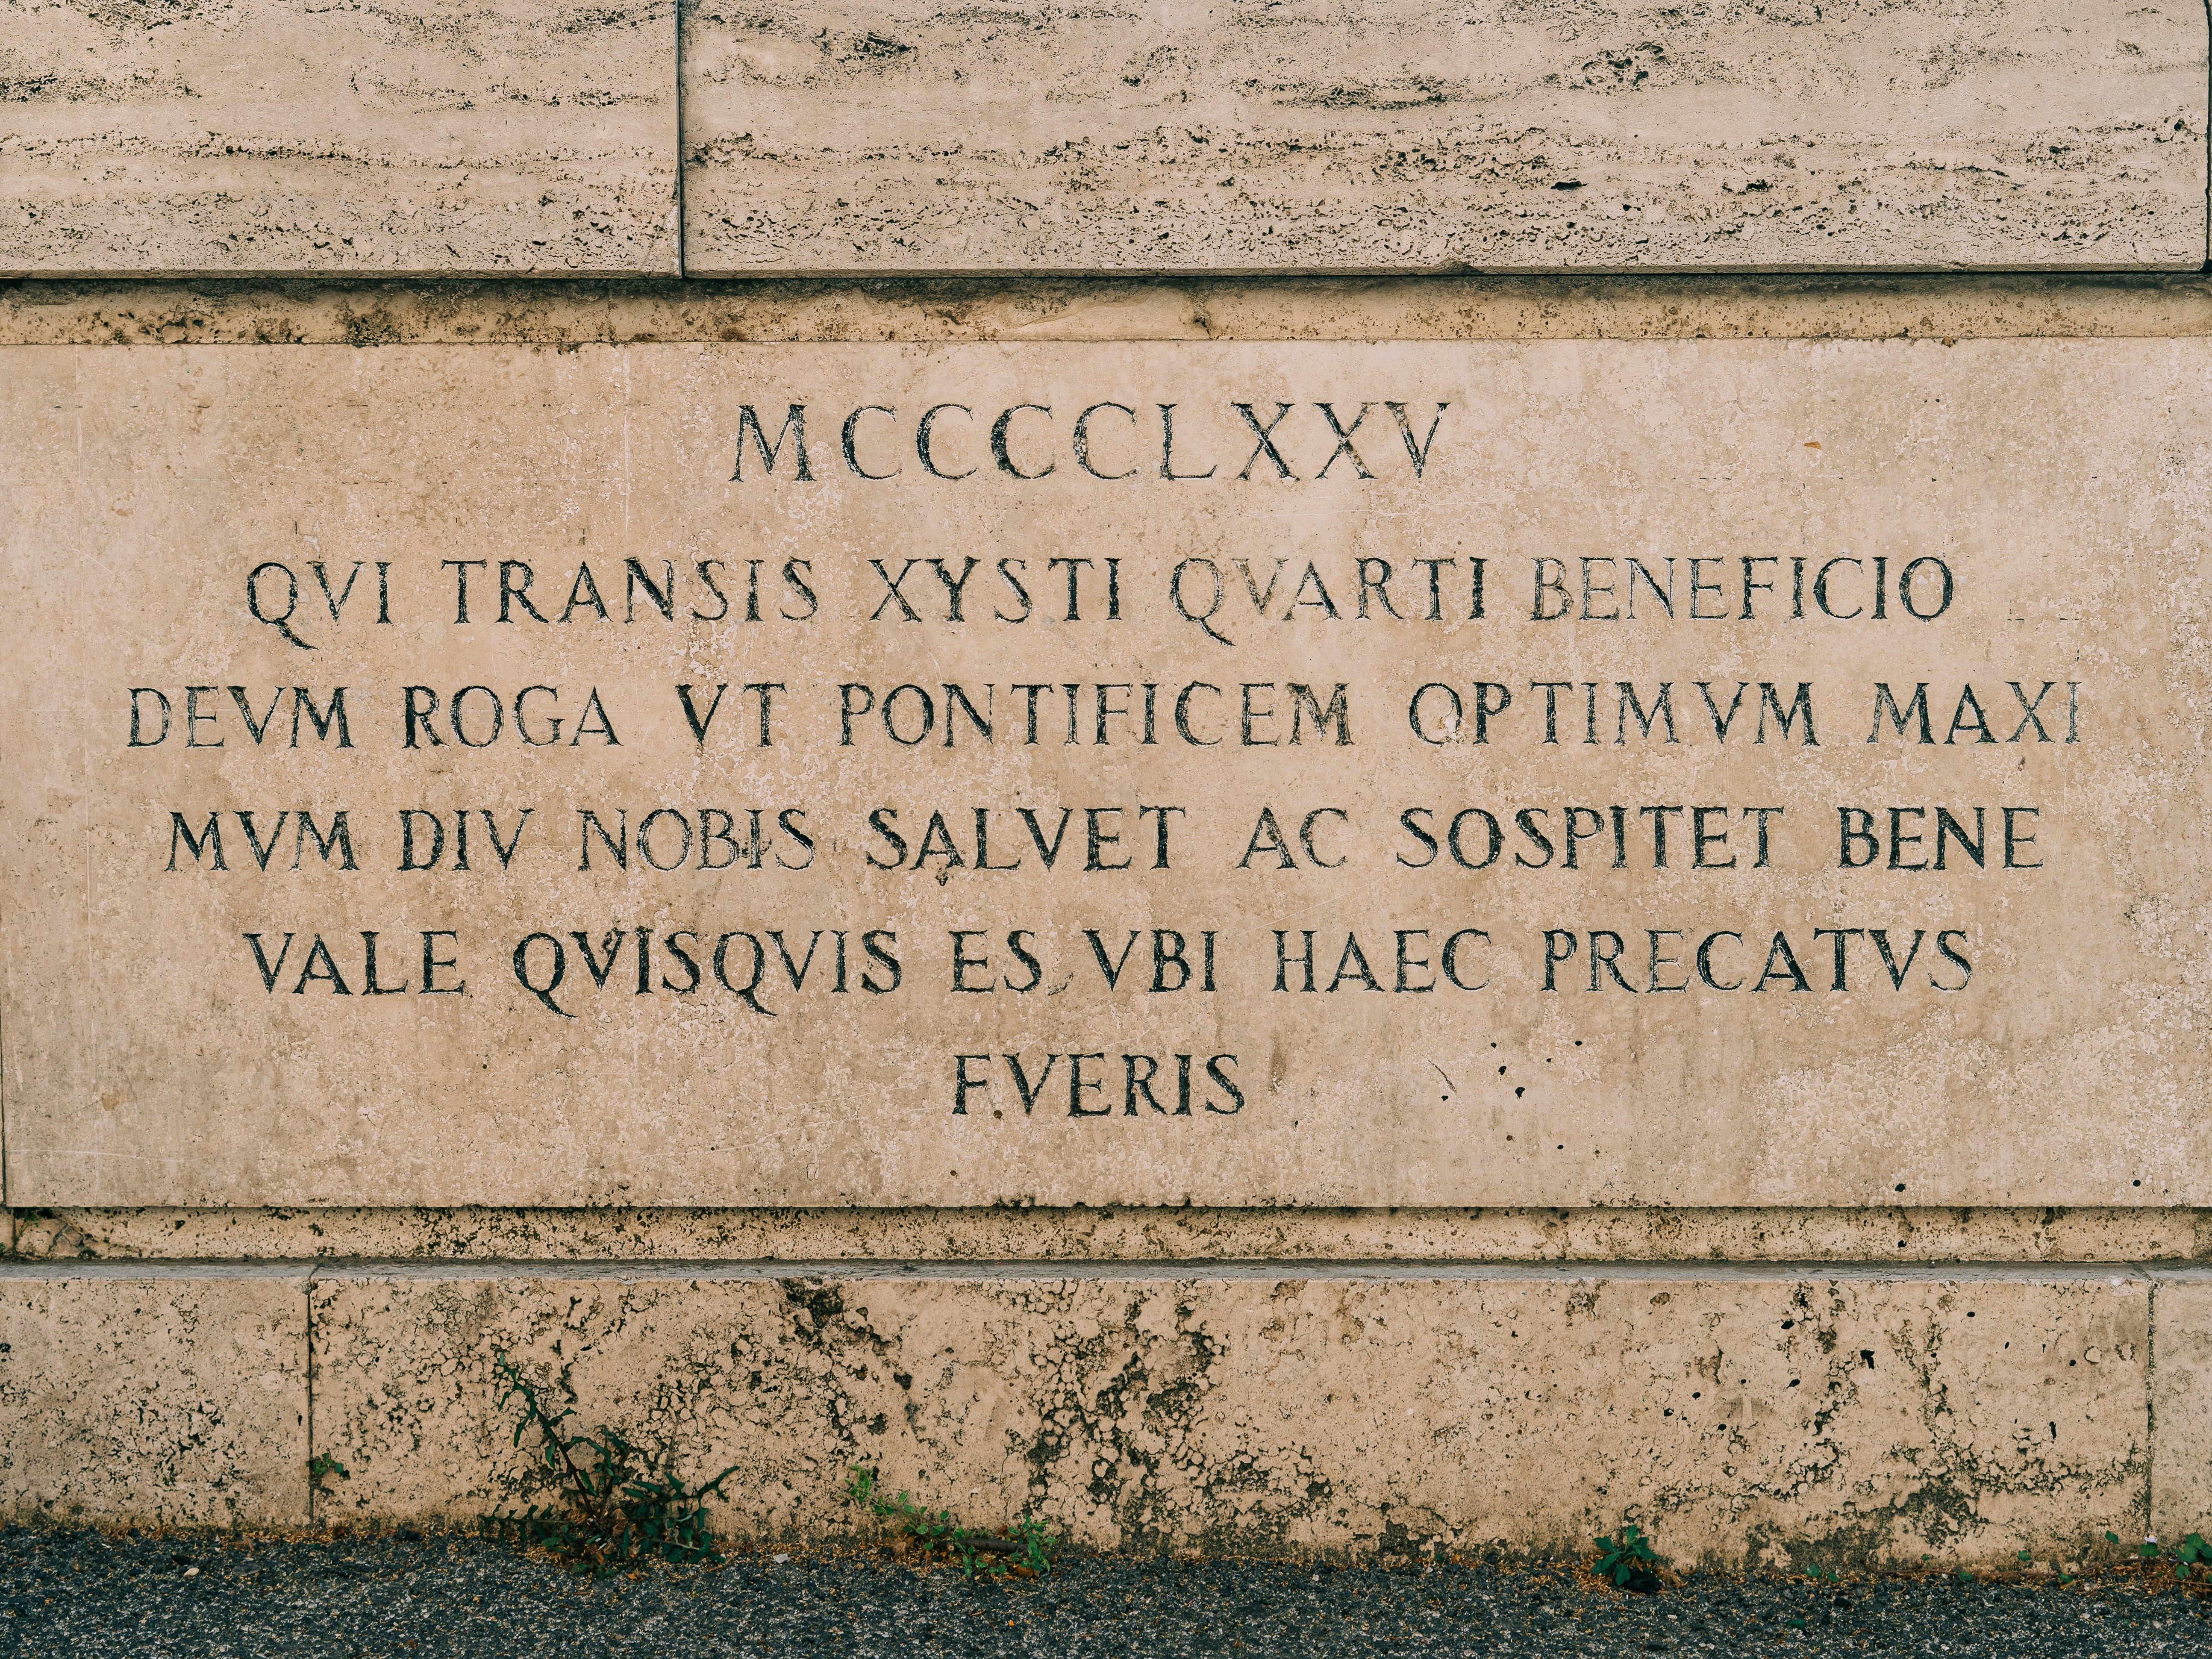 Marble inscription in Latin, dated 1475, located at the beginning of Ponte Sisto bridge in Rome, Italy, commemorating Pope Sixtus IV